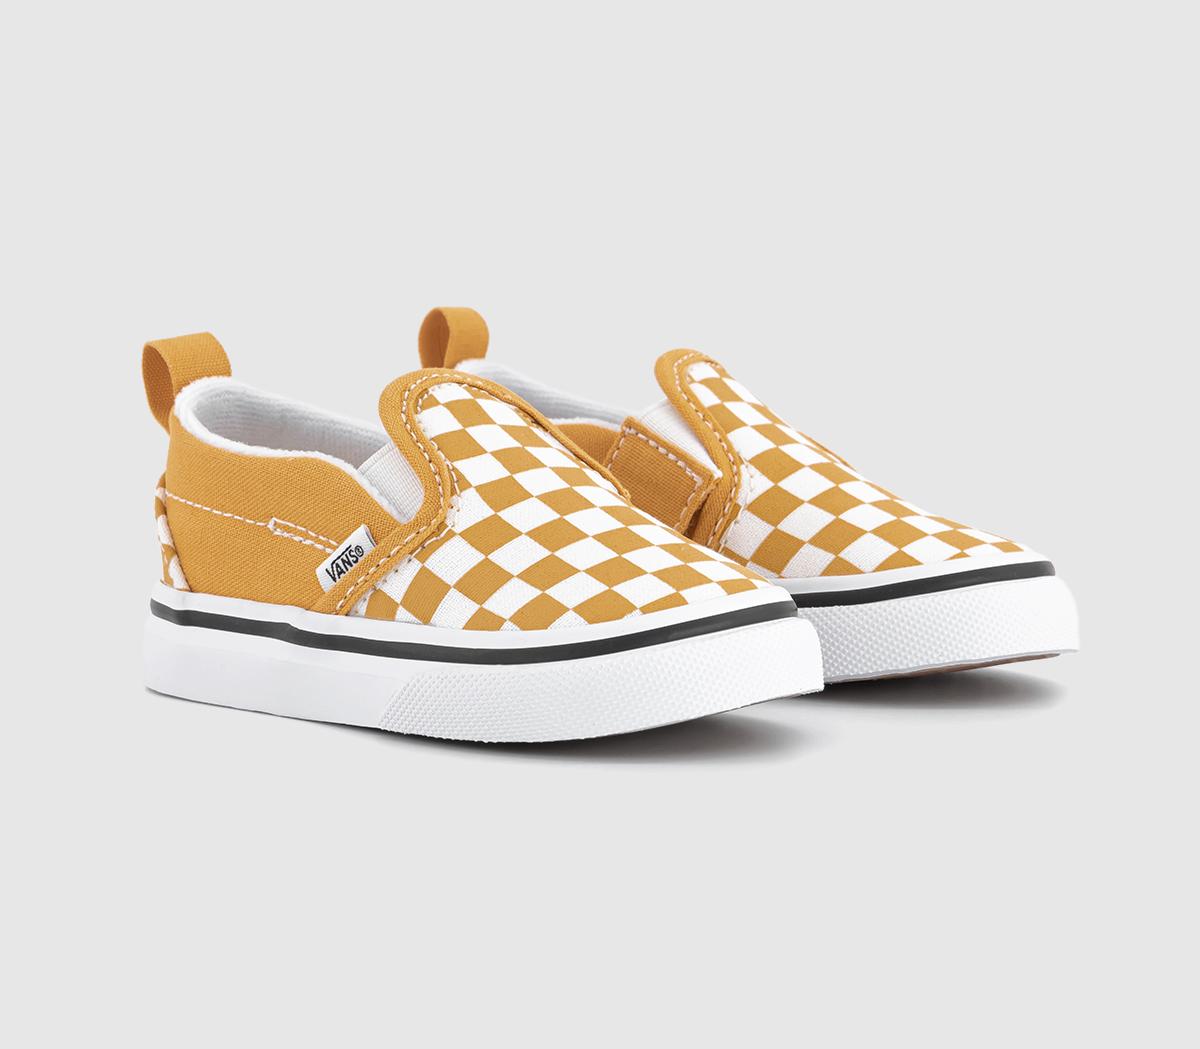 Vans Kids Classic Slip On Toddler Trainers Color Theory Checkerboard Golden Glow Gold/White, 7infant